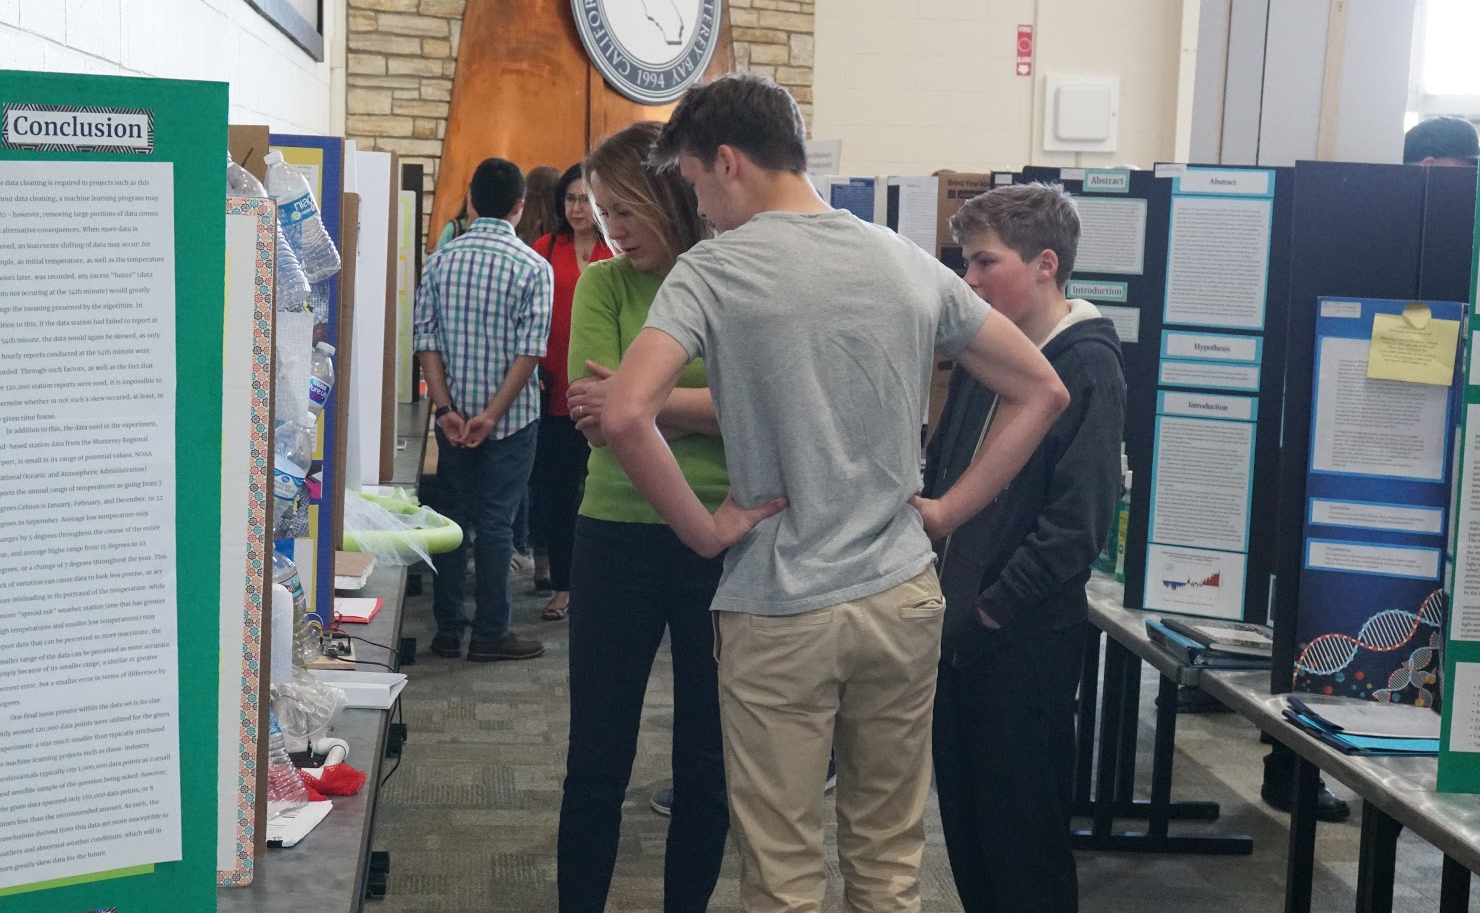 Attendees viewing Science Fair posters